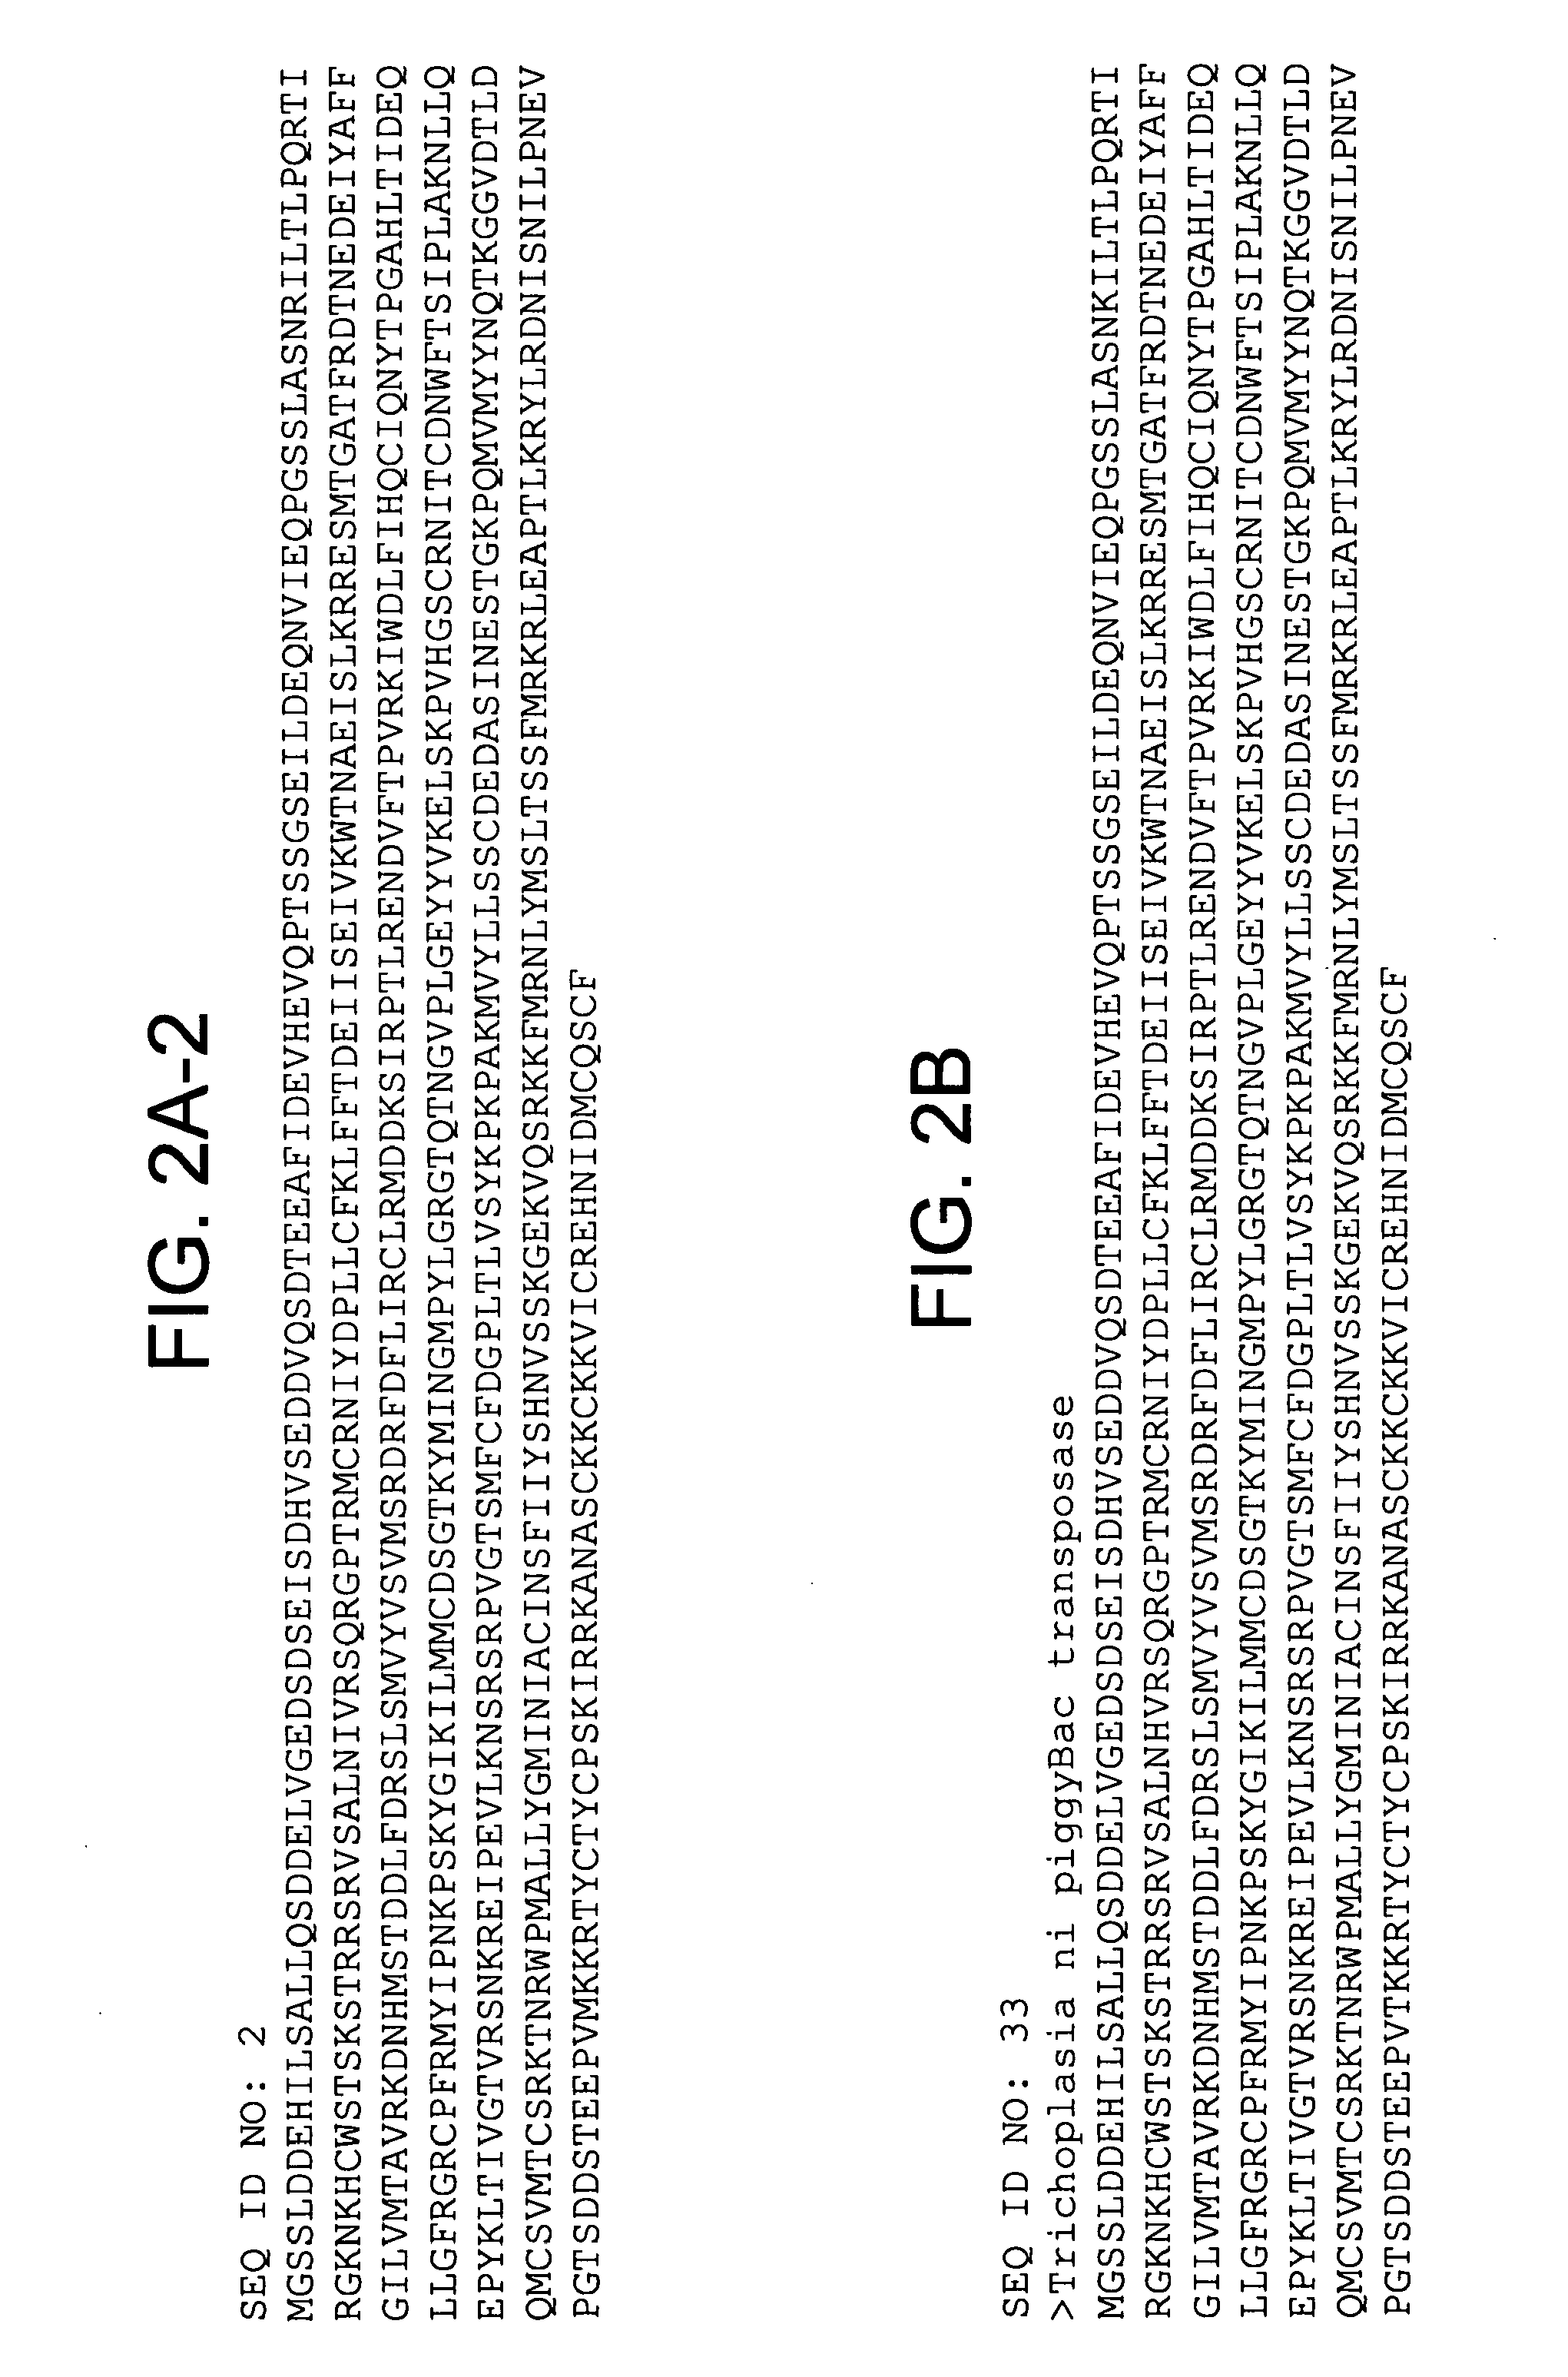 Piggybac transposon variants and methods of use